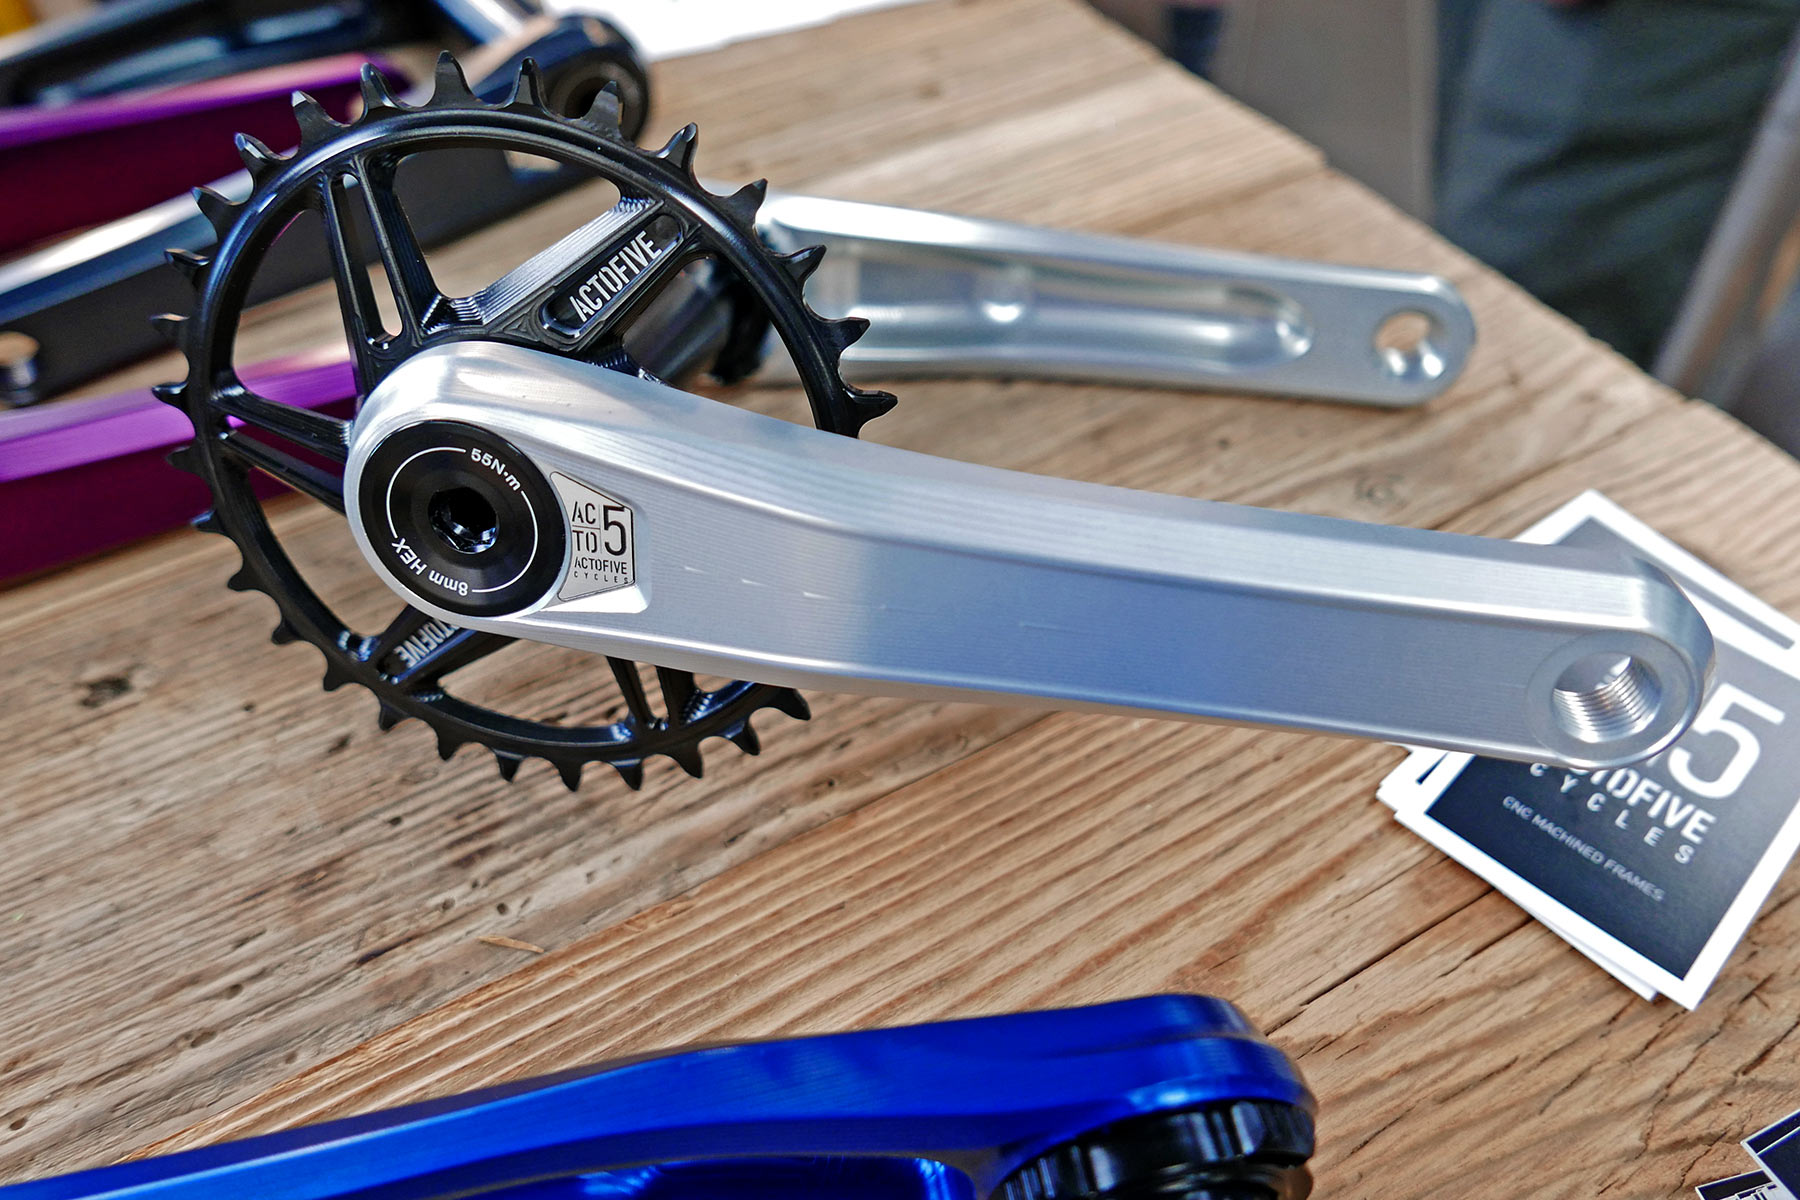 Actofive Signature X more affordable CNC-machined aluminum MTB crankset made-in-Germany, silver ano with chainring